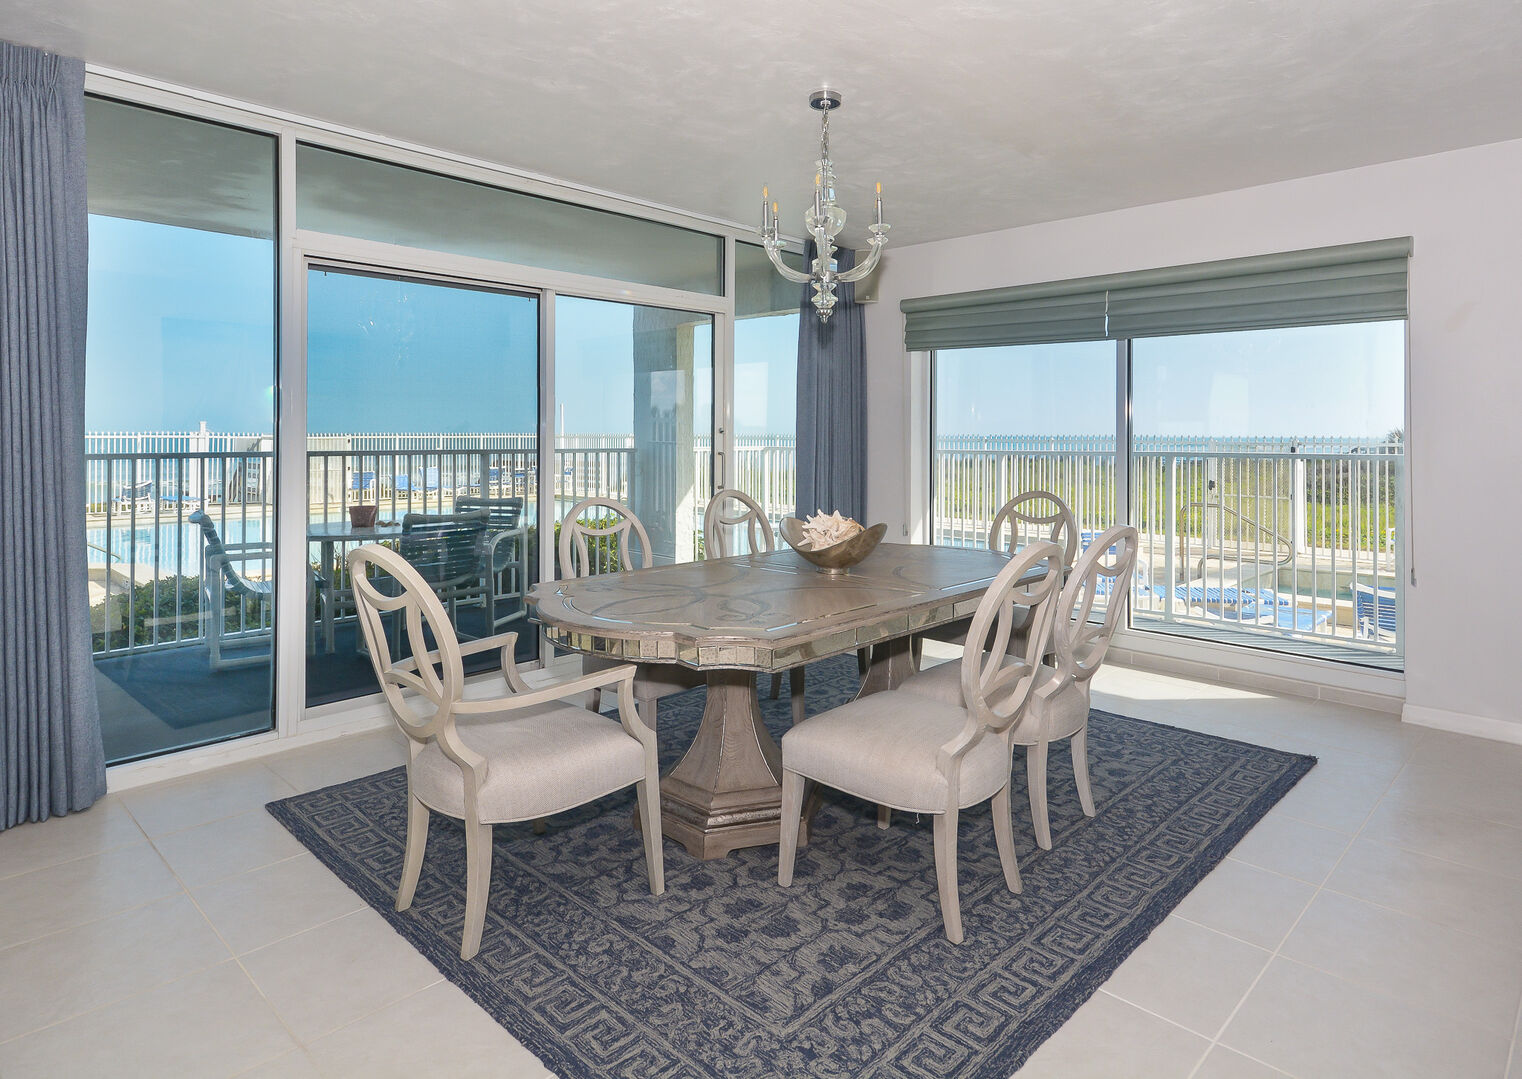 Enjoy meals with family with an oceanfront view of the ocean.